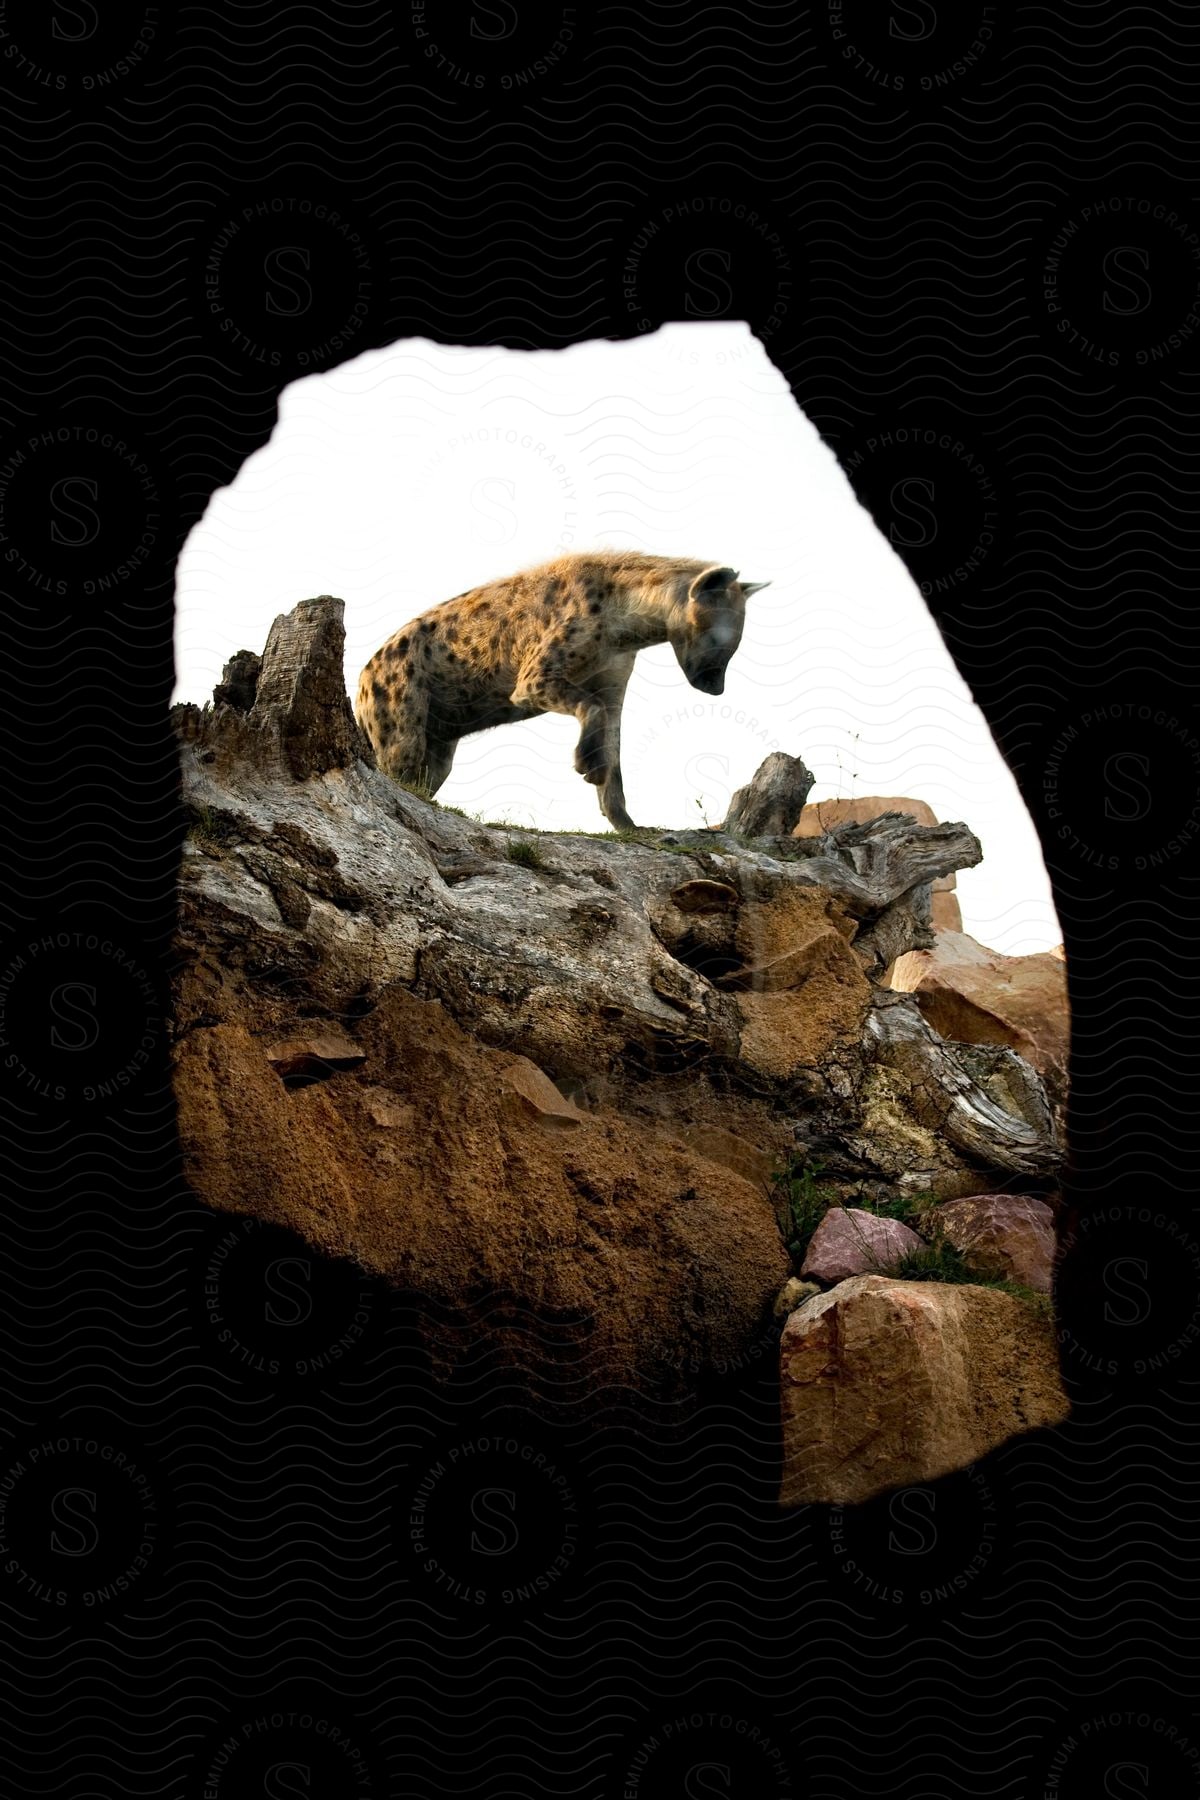 A hyena standing on a rocky hill seen from inside a cave